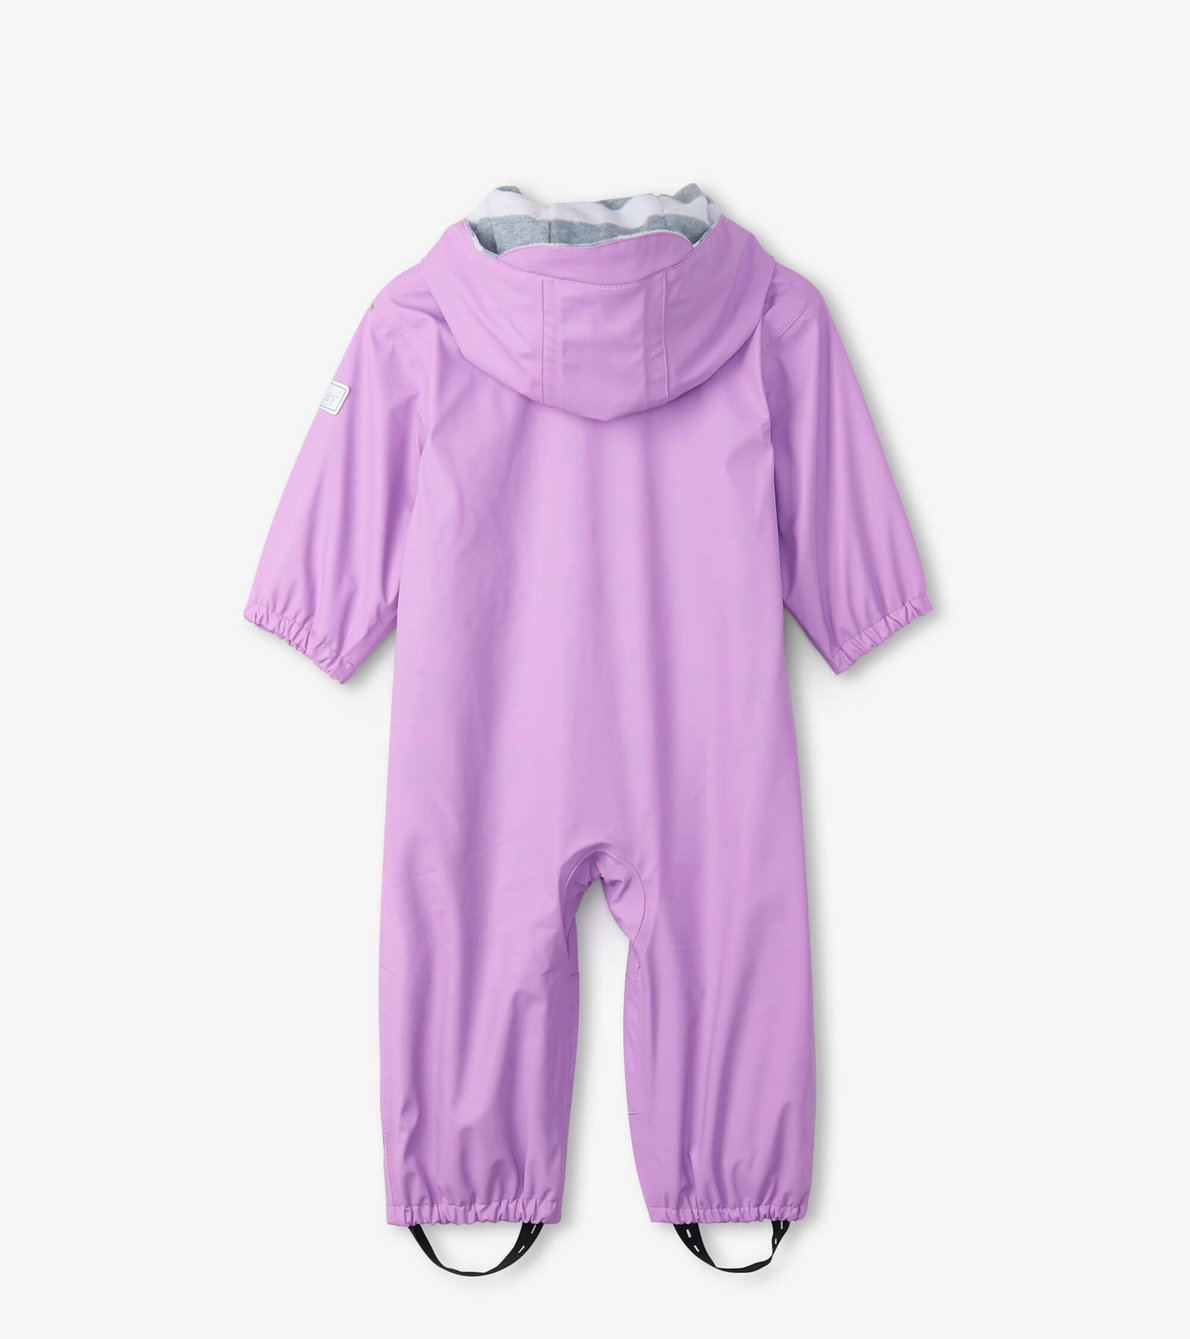 View larger image of Lilac Terry Lined Baby Rain Suit